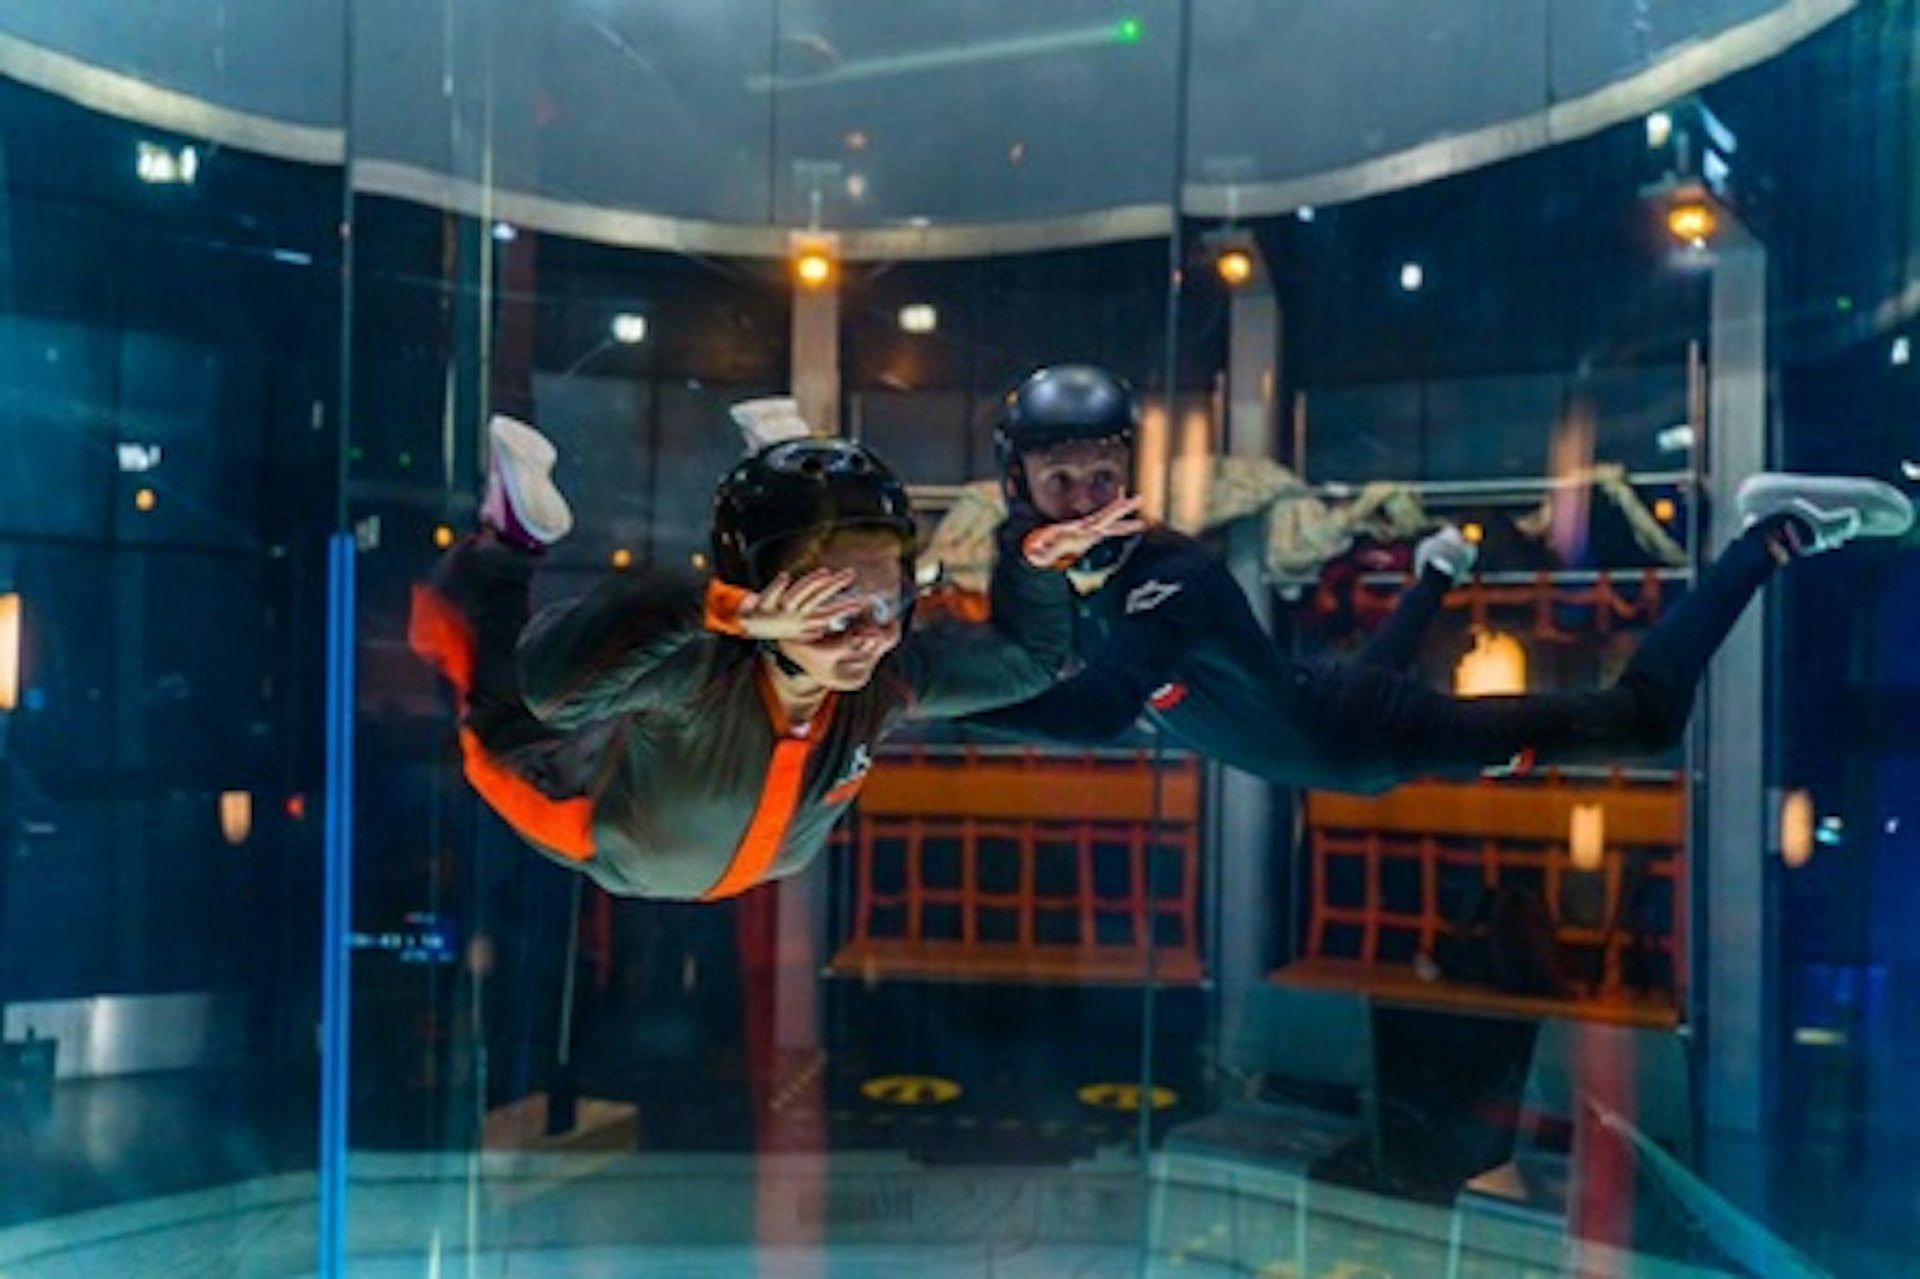 iFly Indoor Skydiving and High Ropes for Two at The Bear Grylls Adventure 3